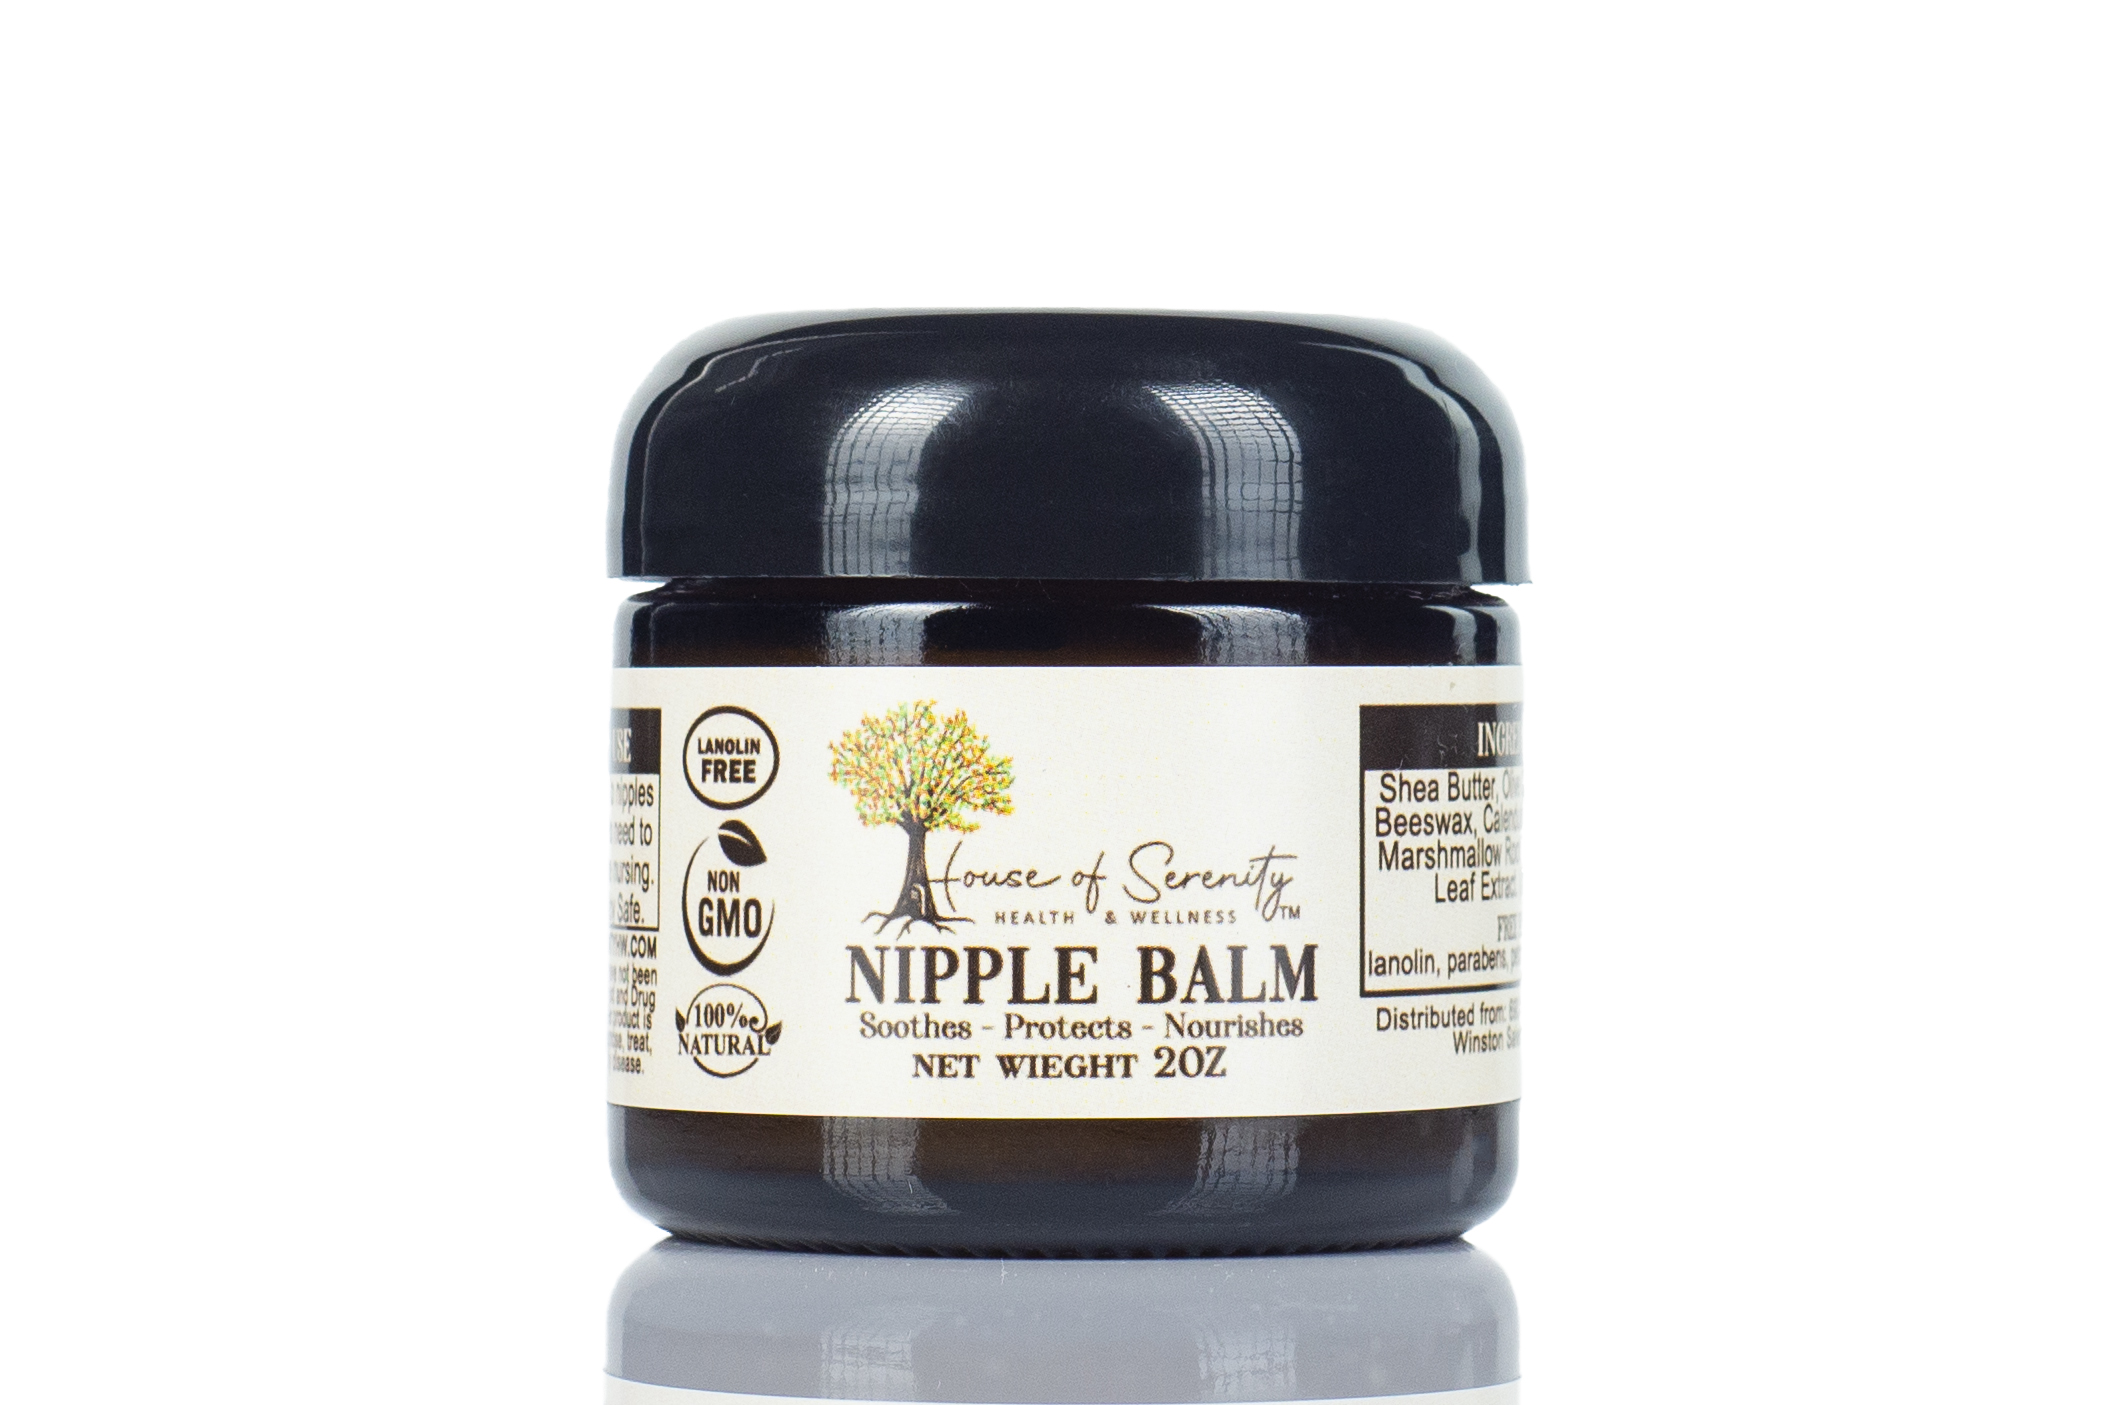 Nipple Balm by House of Serenity Health and Wellness